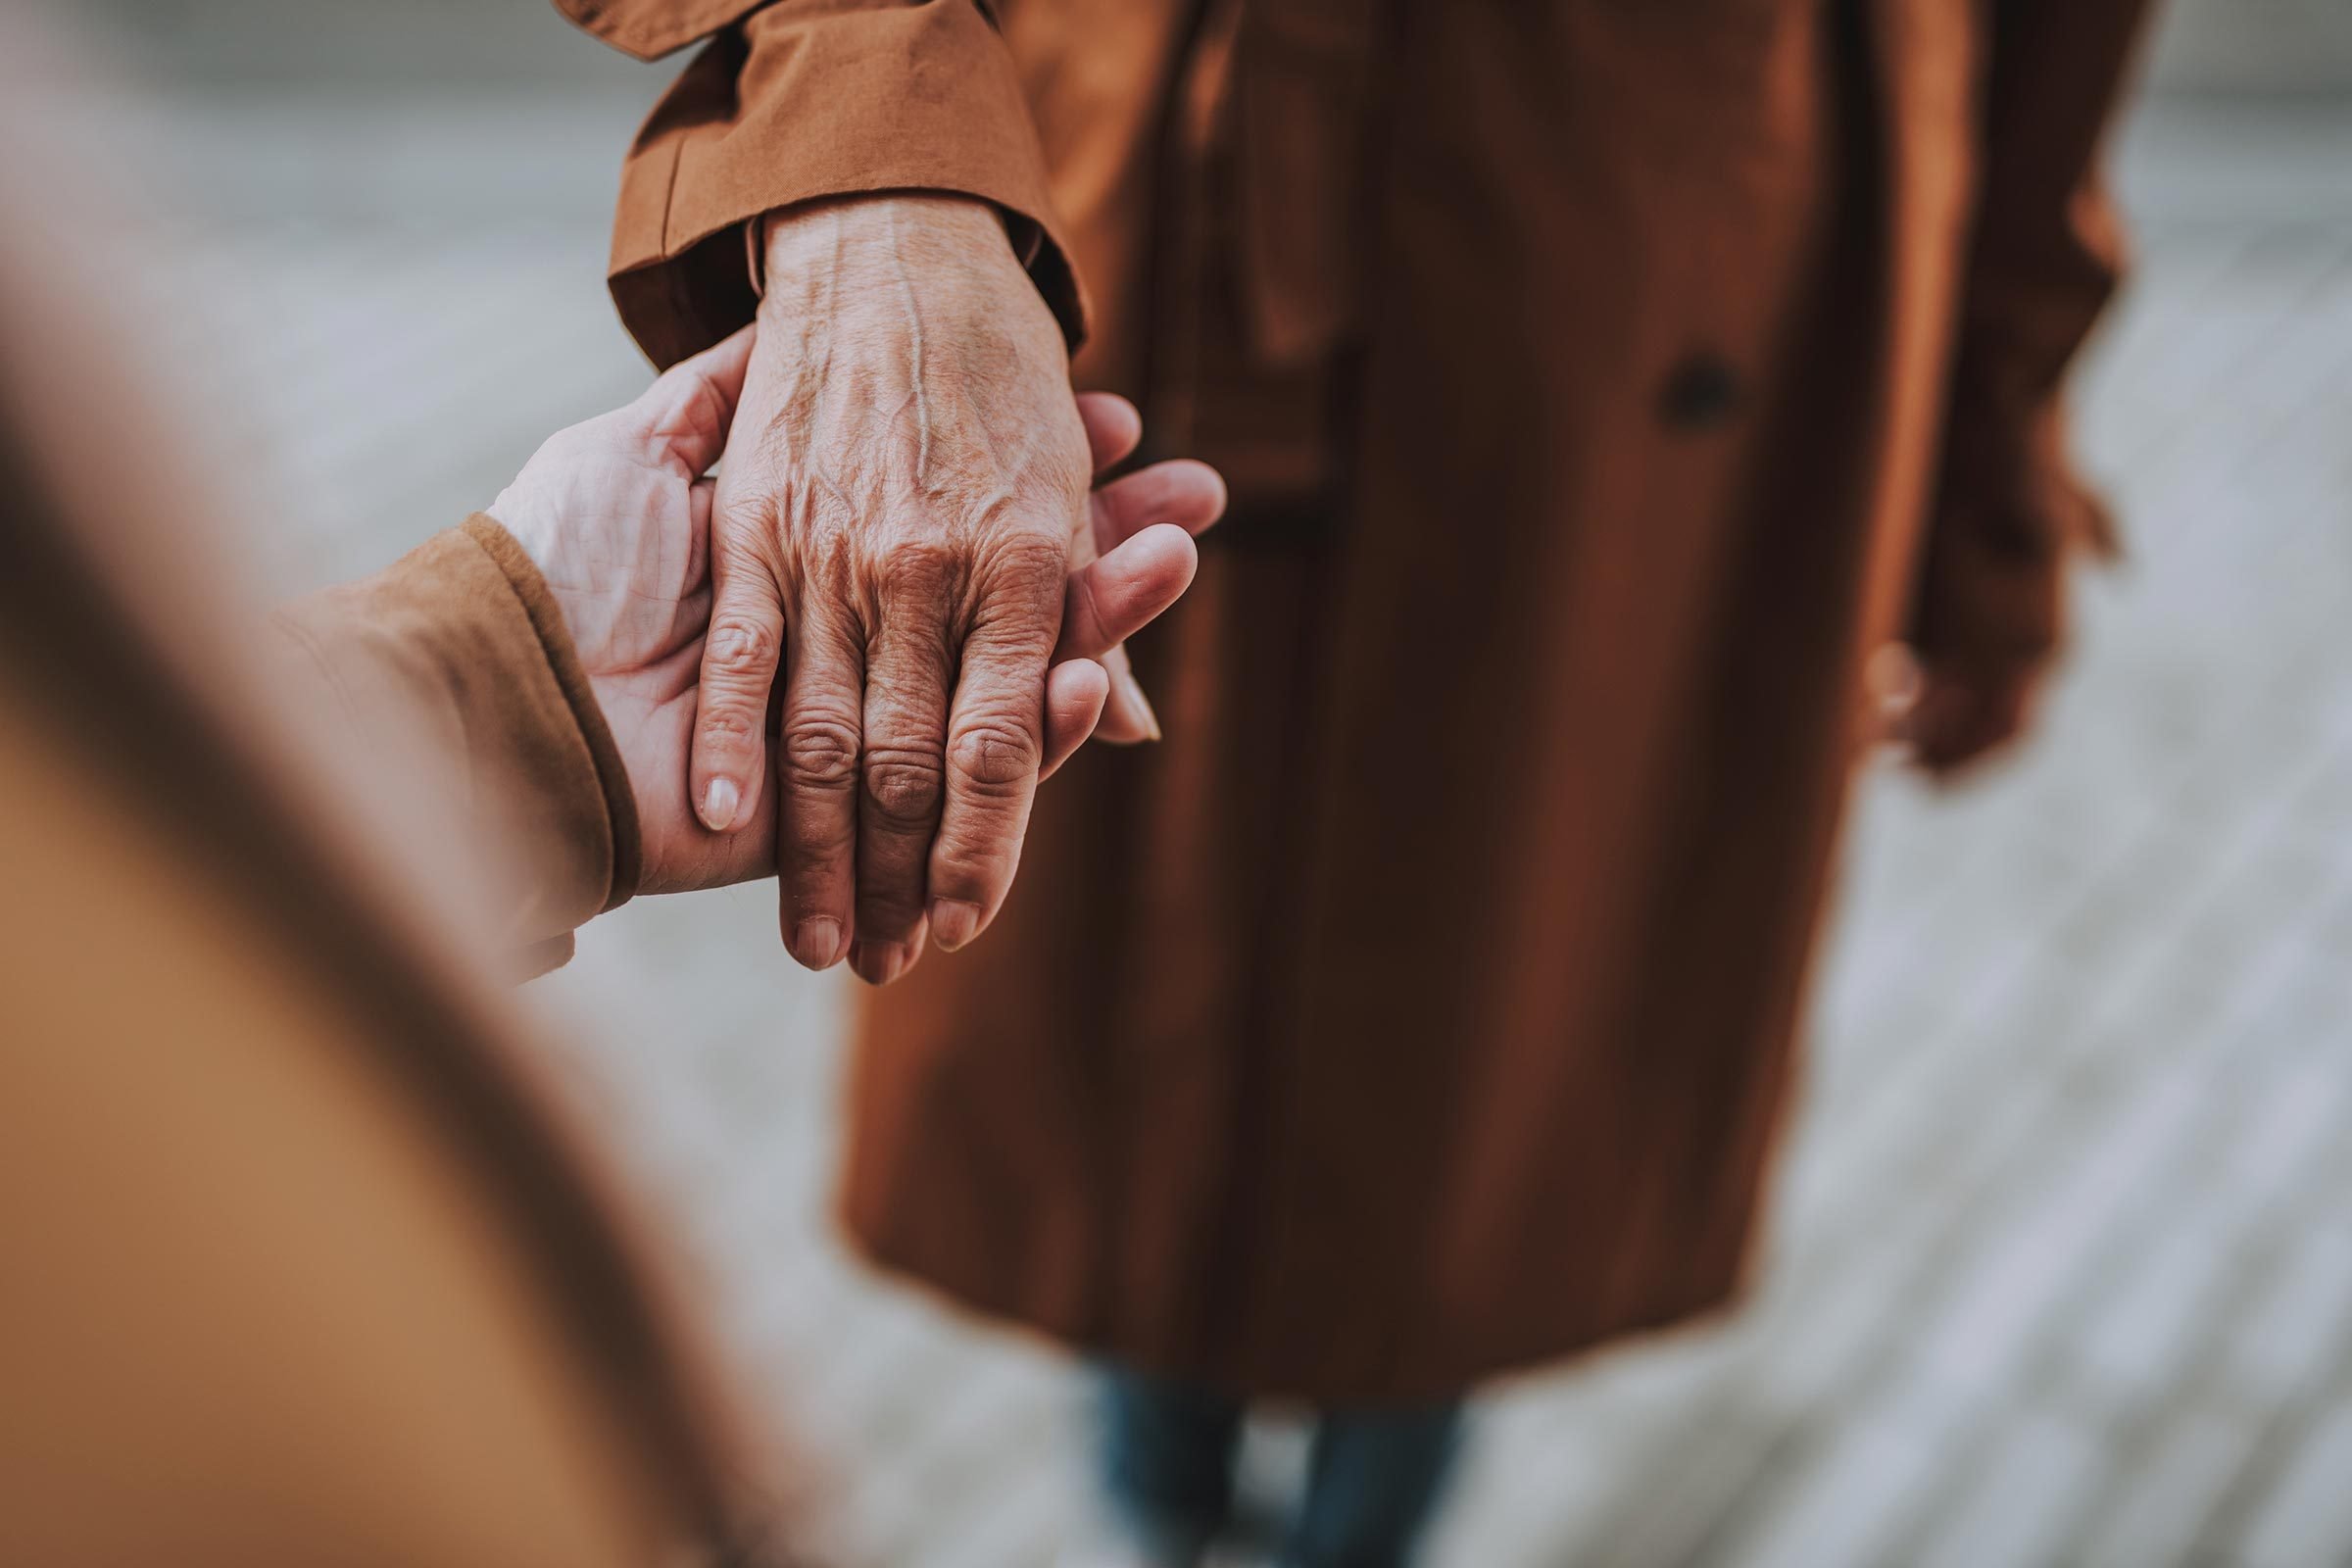 9 Warning Signs Your Elderly Parent Shouldn't Be Living Alone Anymore